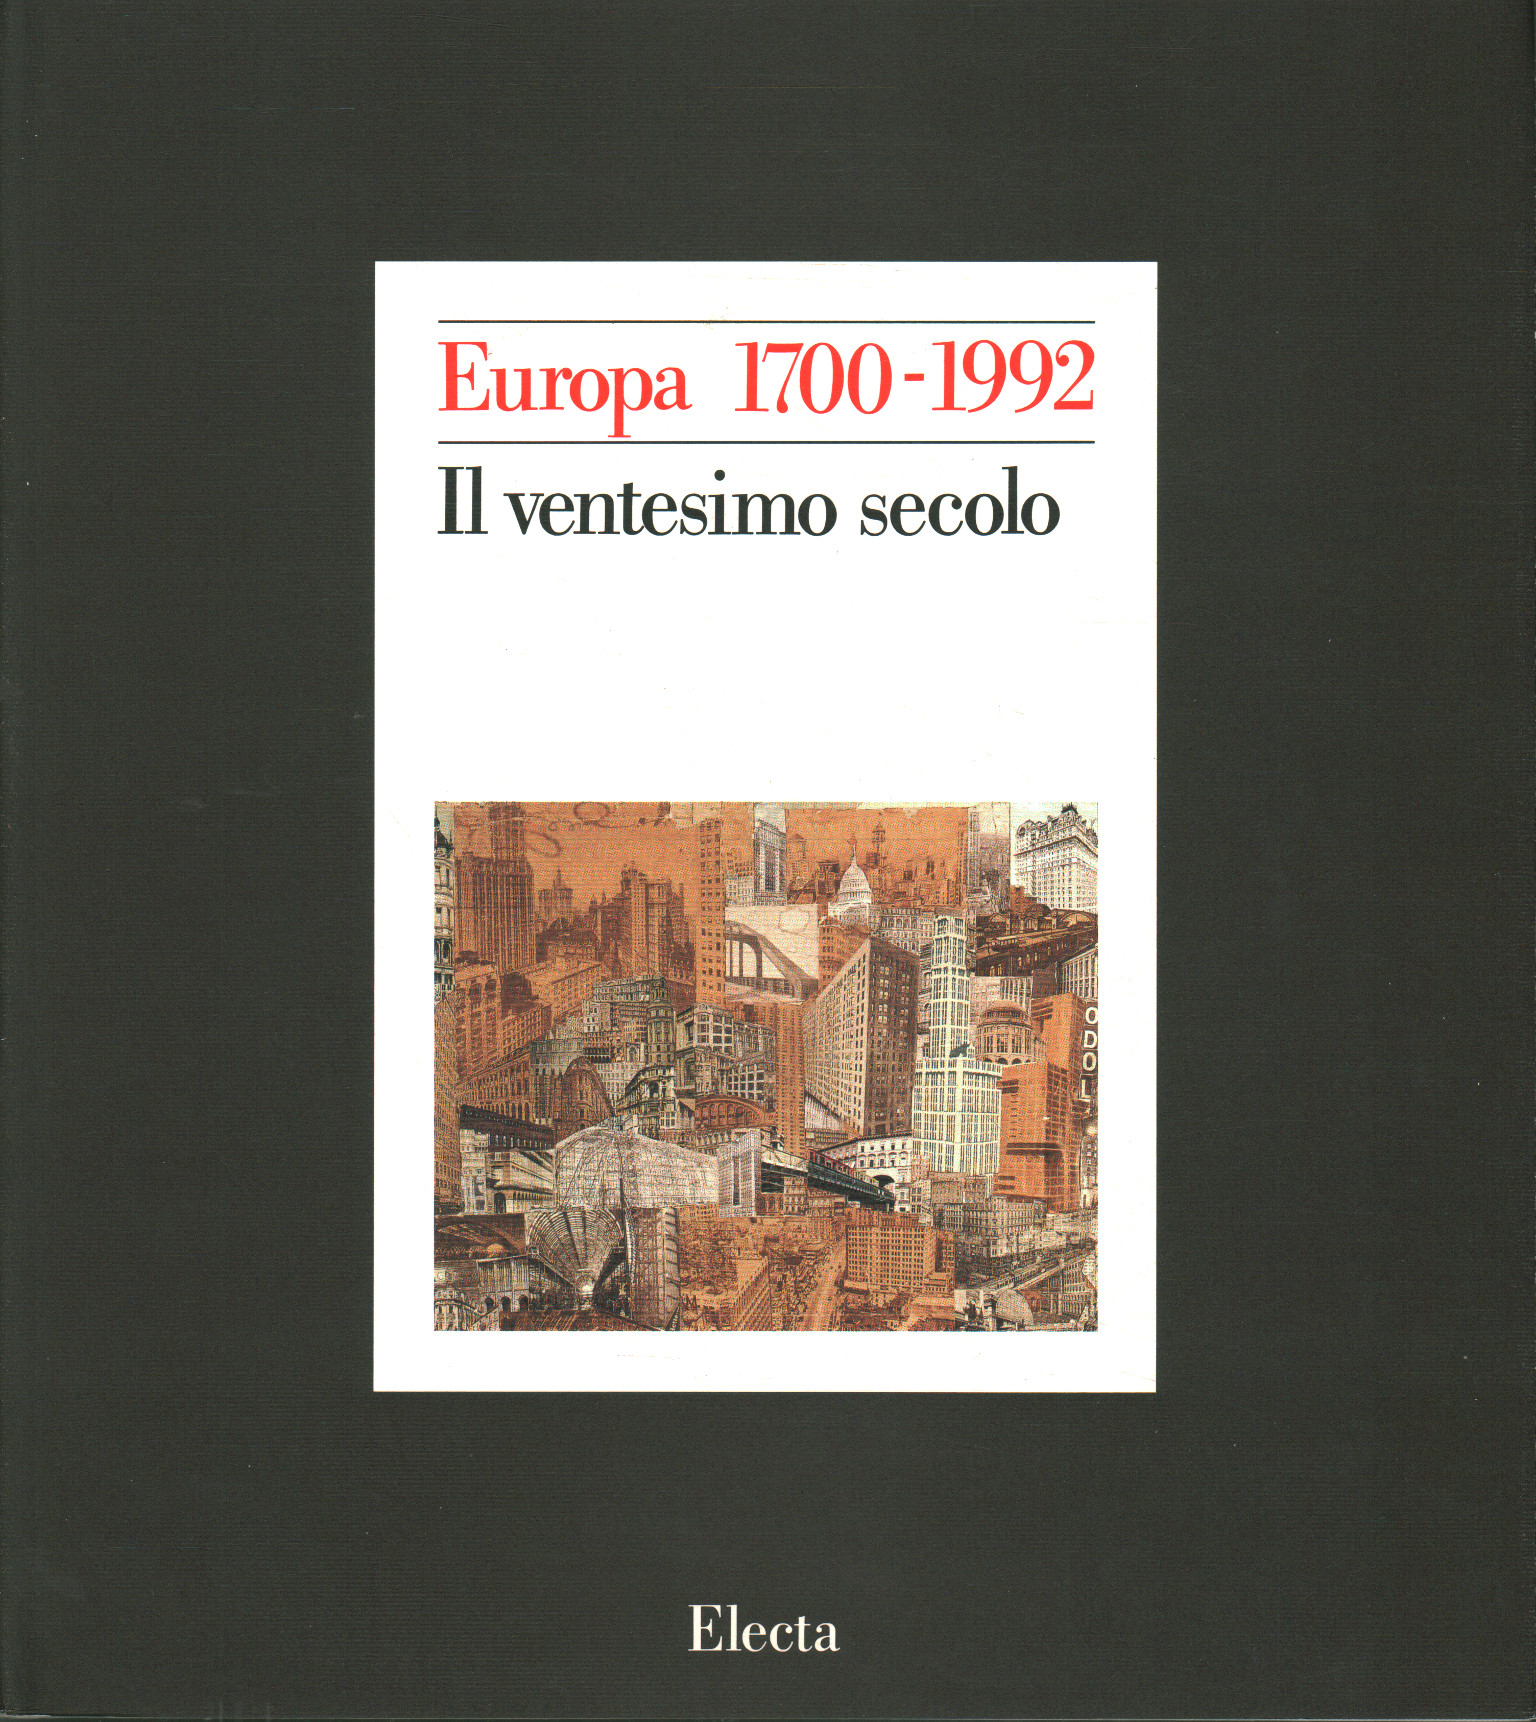 Europe 1700-1992: History of a '